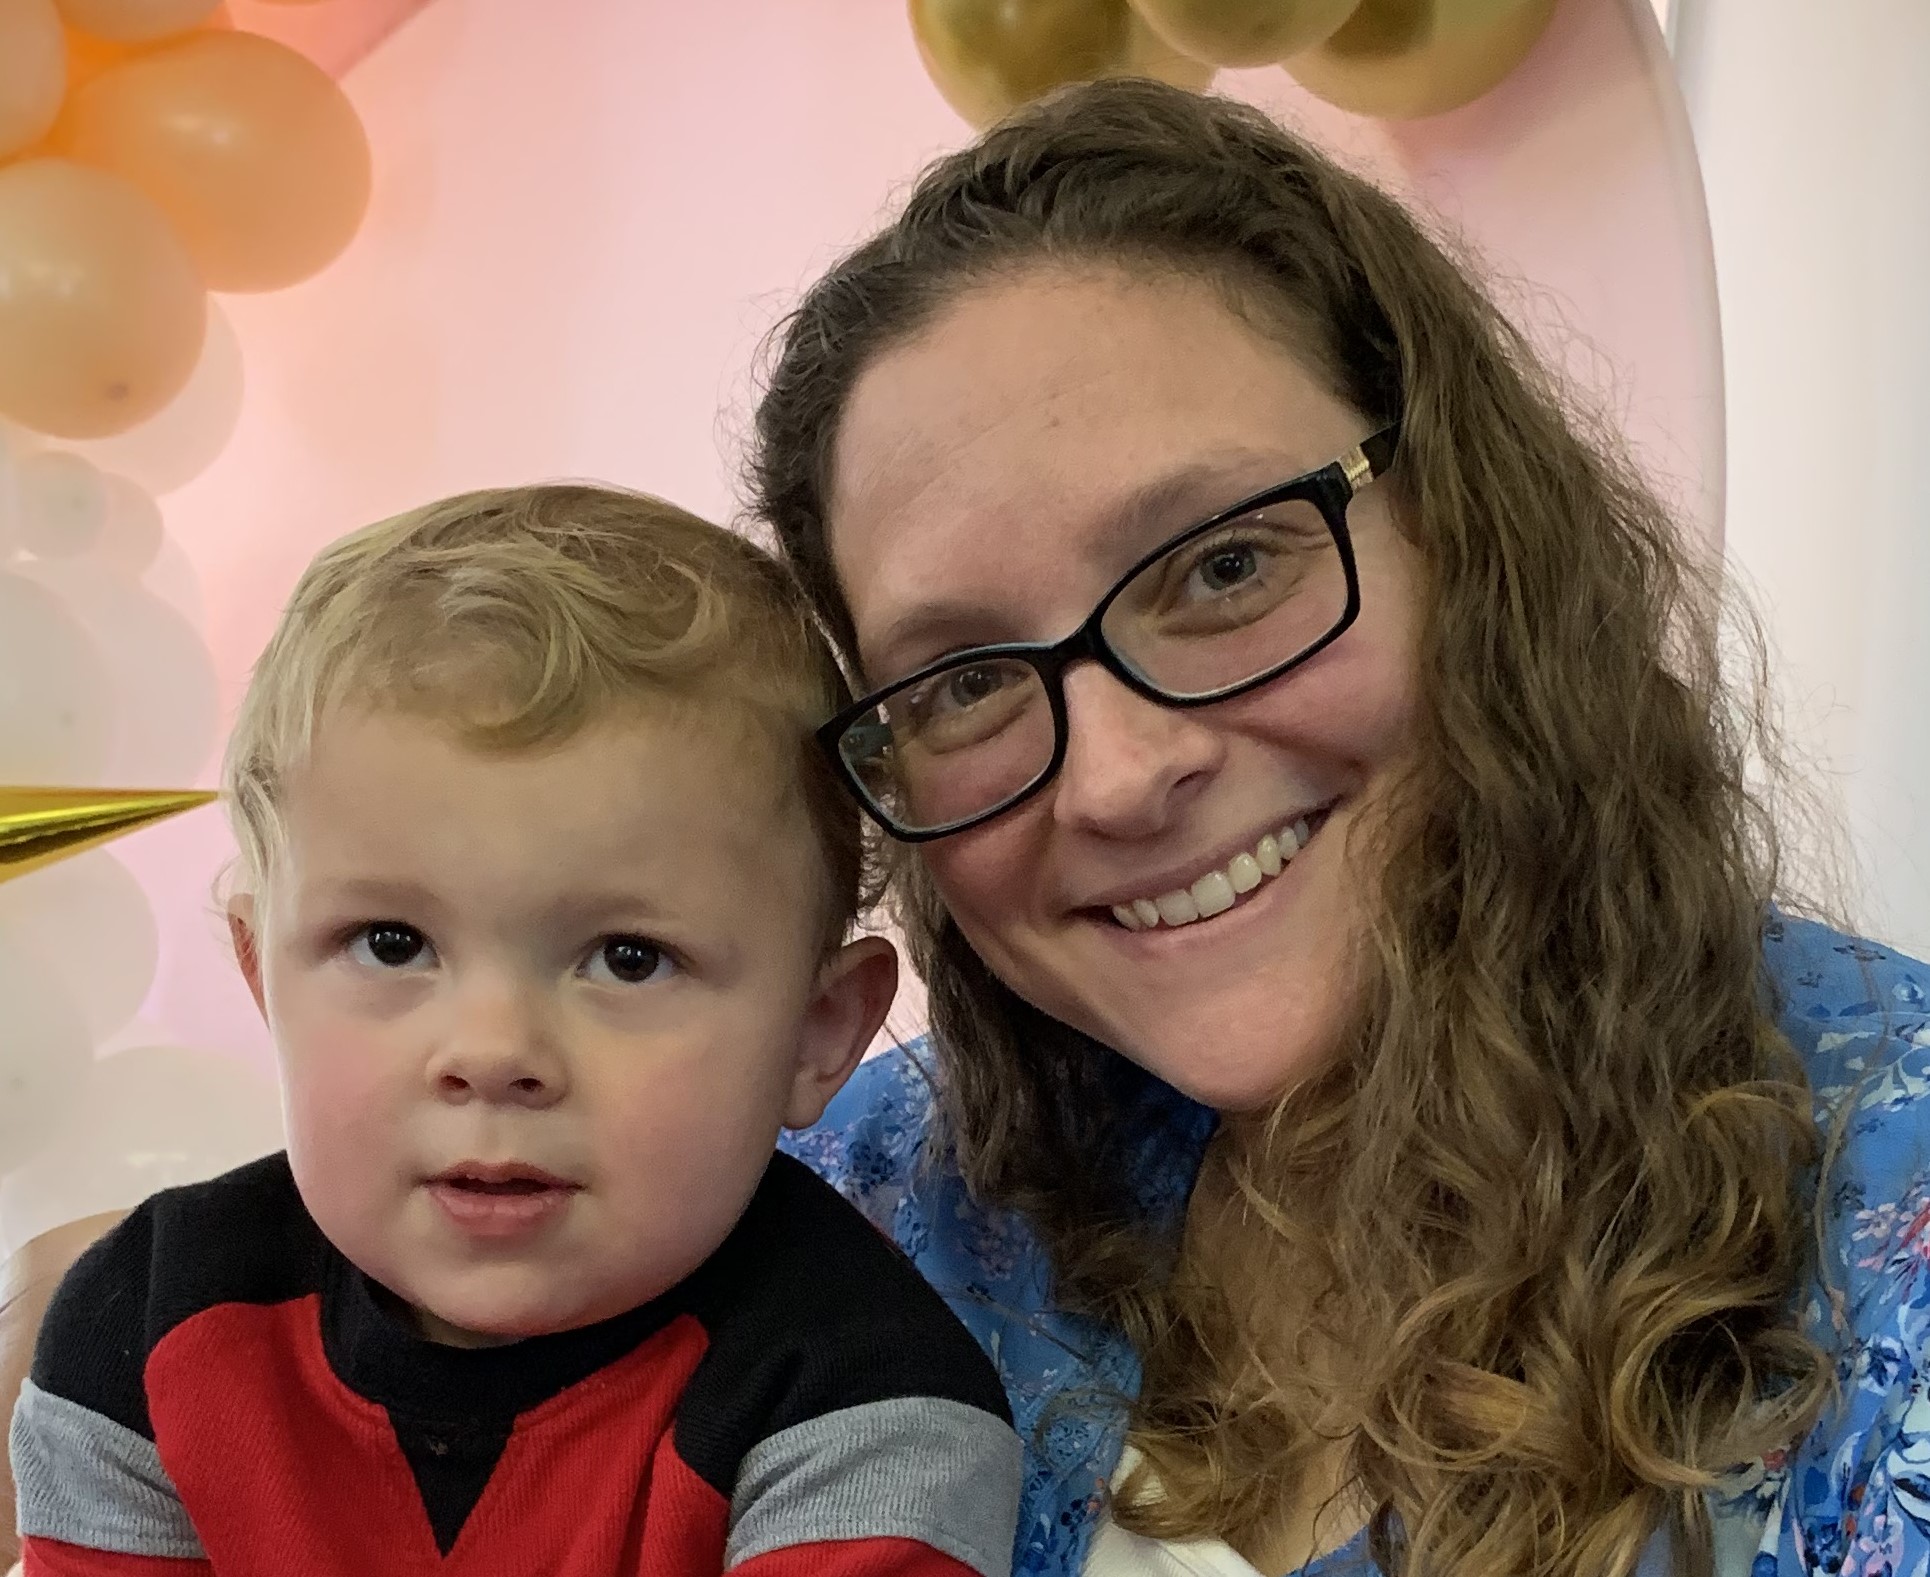 Single mom credits pregnancy help center for life-changing support